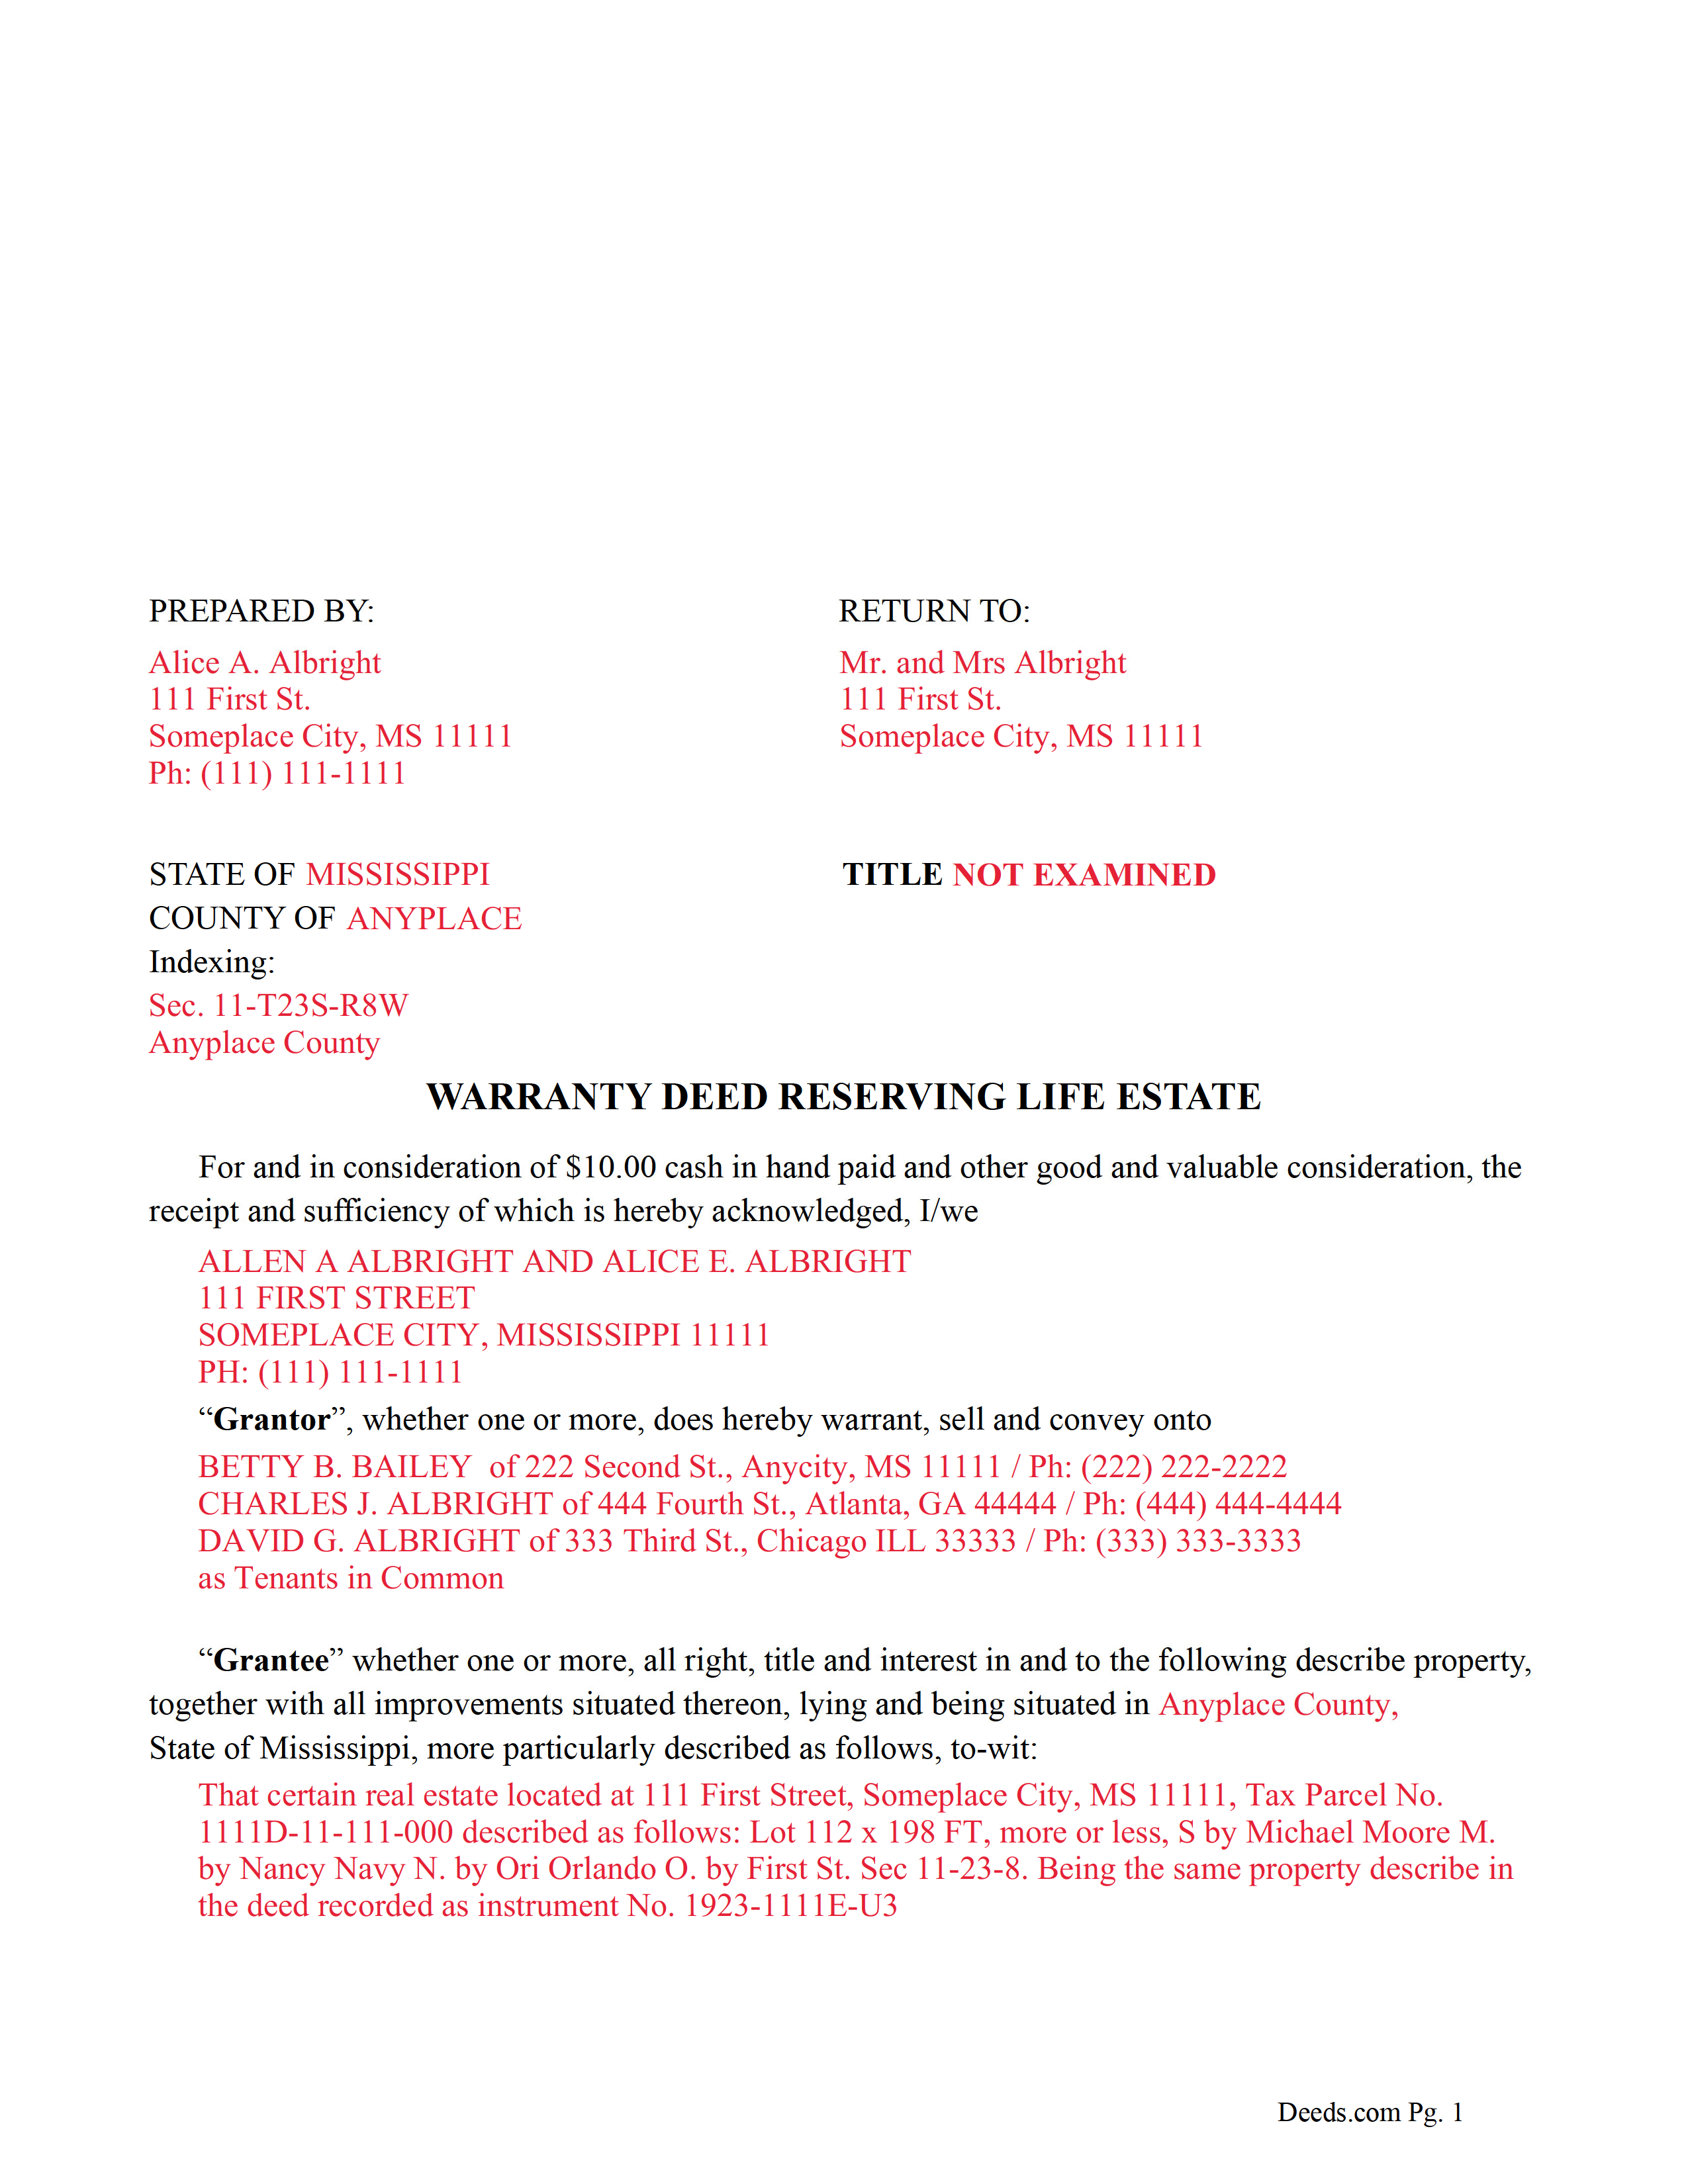 Completed Example of the Warranty Deed Reserving Life Estate Form